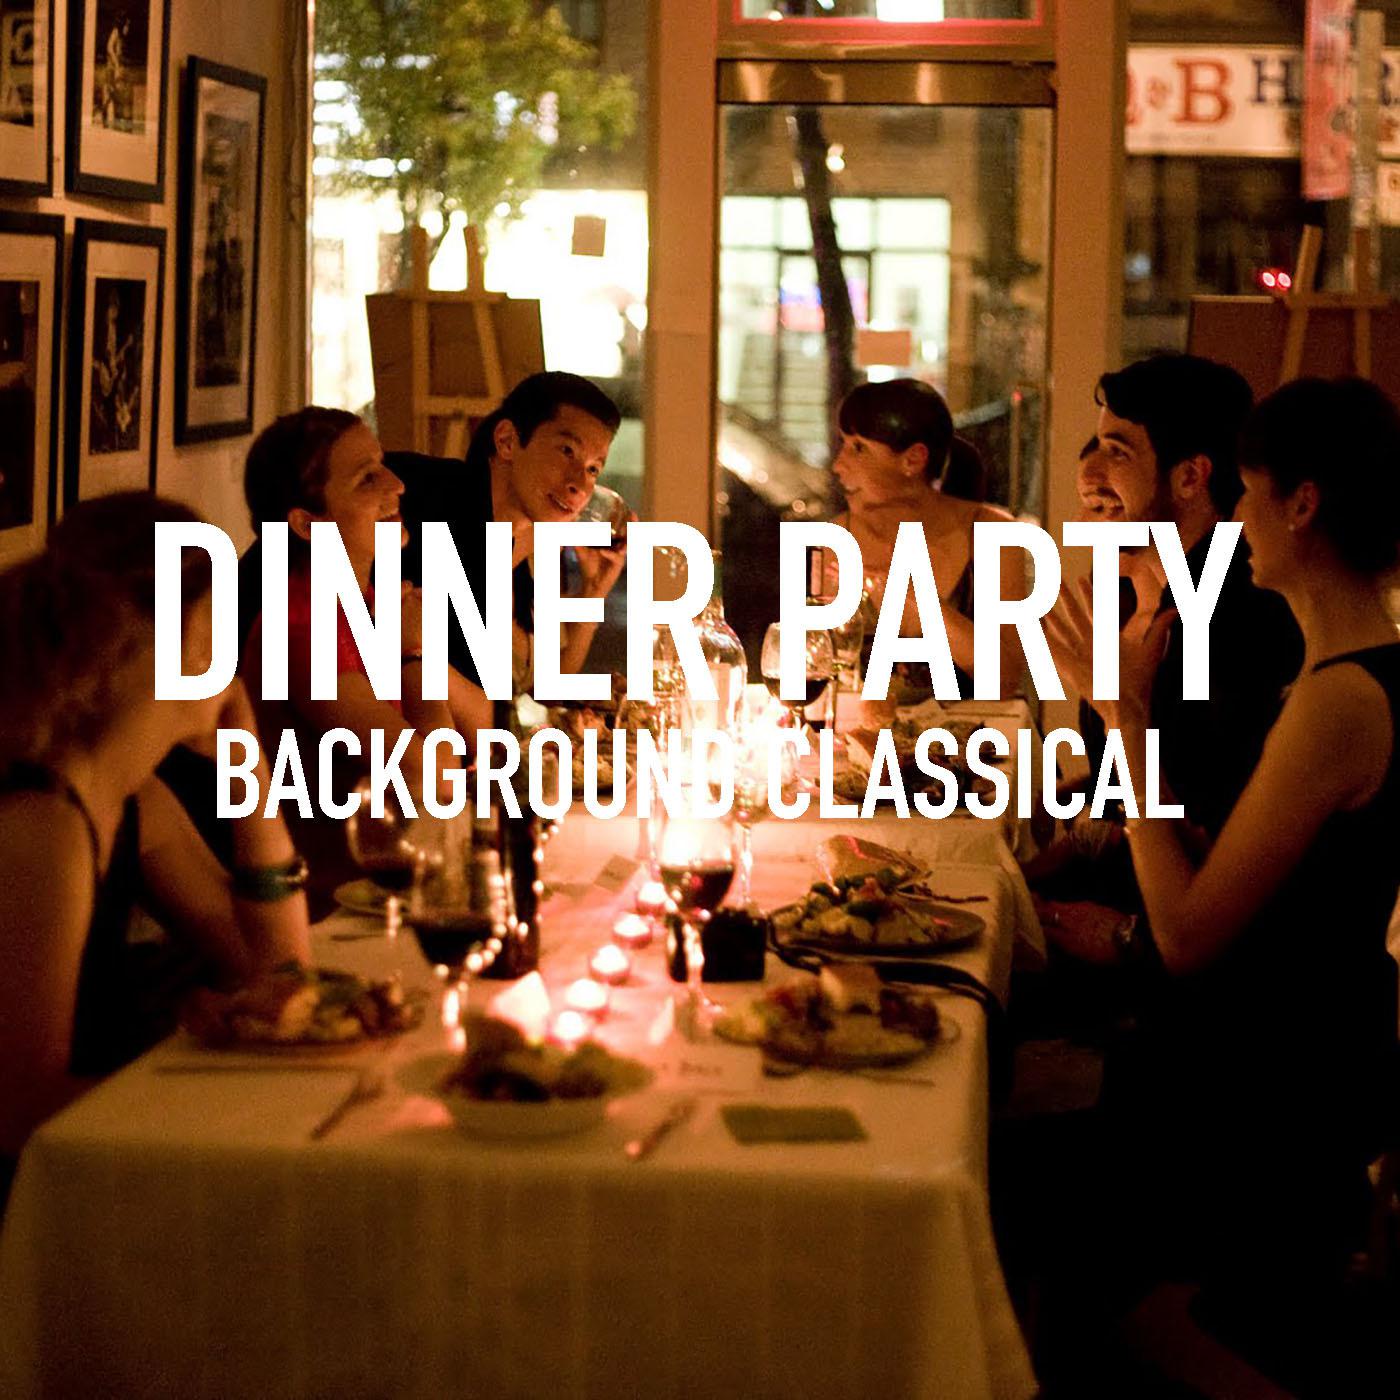 Dinner Party Background Classical